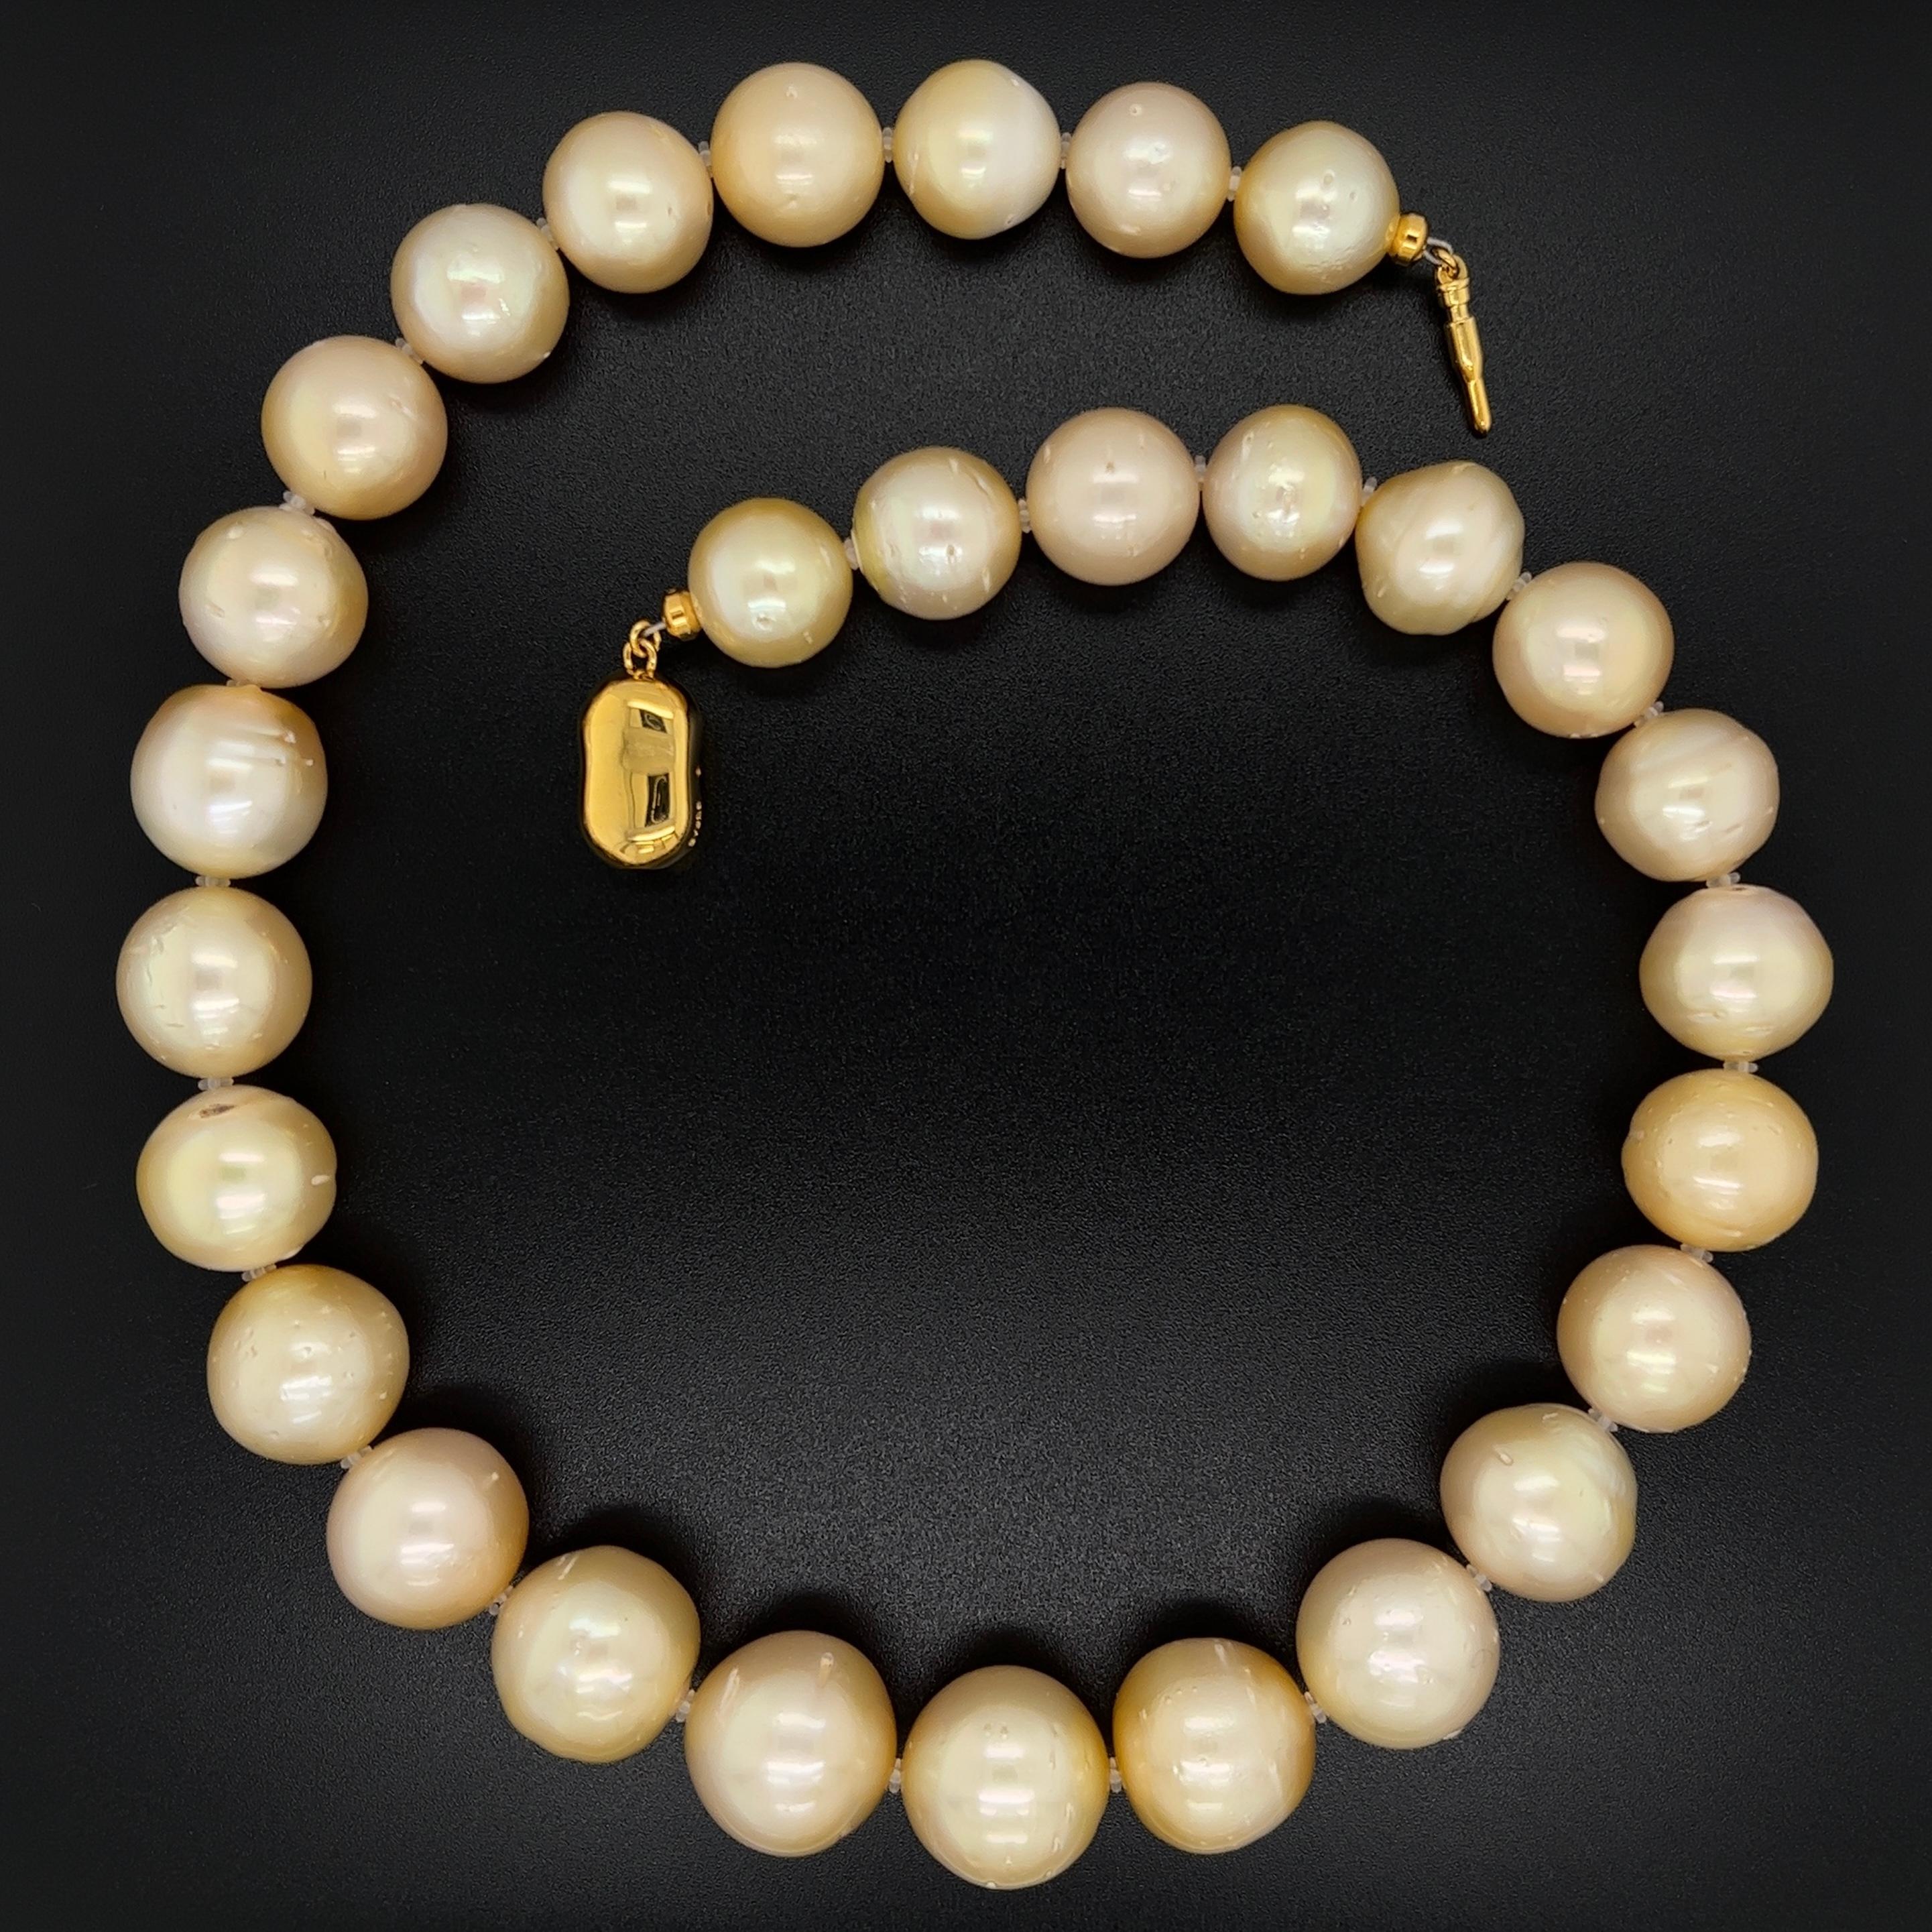 Simply Beautiful! South Sea Golden Pearl Necklace, comprising 29 South Sea Golden Pearls, each approx. 15.8mm - 12.3mm held by a 925 Yellow Gold clasp. Natural Blemishes. Hand strung with matching silk cord. The necklace measures approx. 17” long.